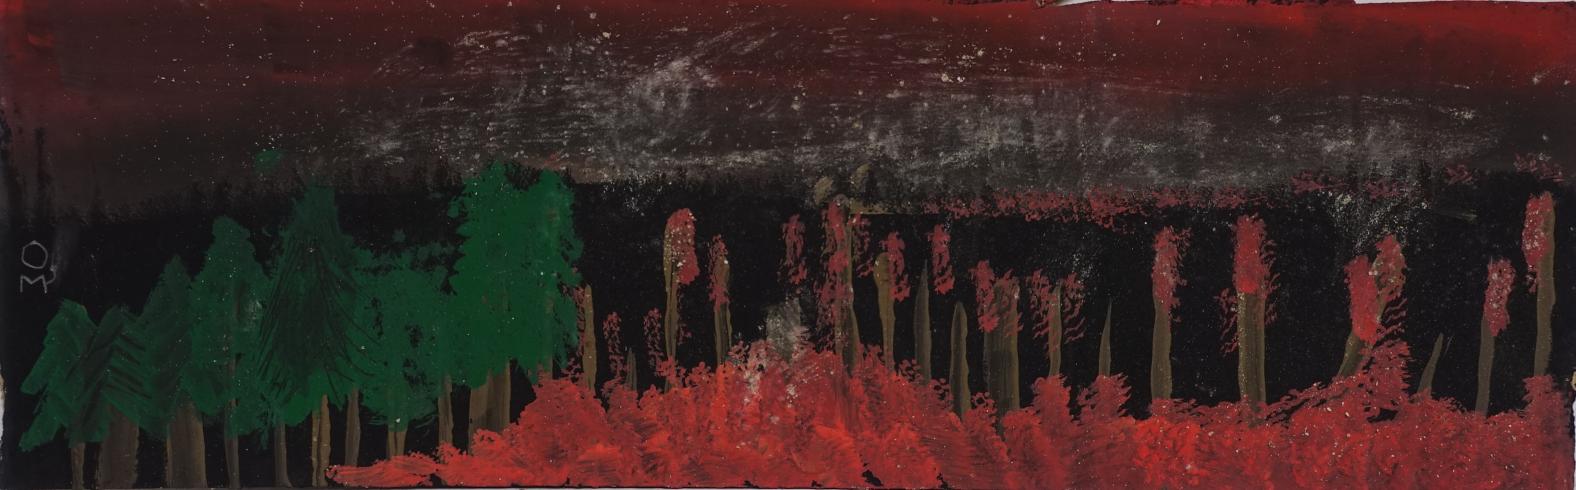 A forest scene with trees burning in red.